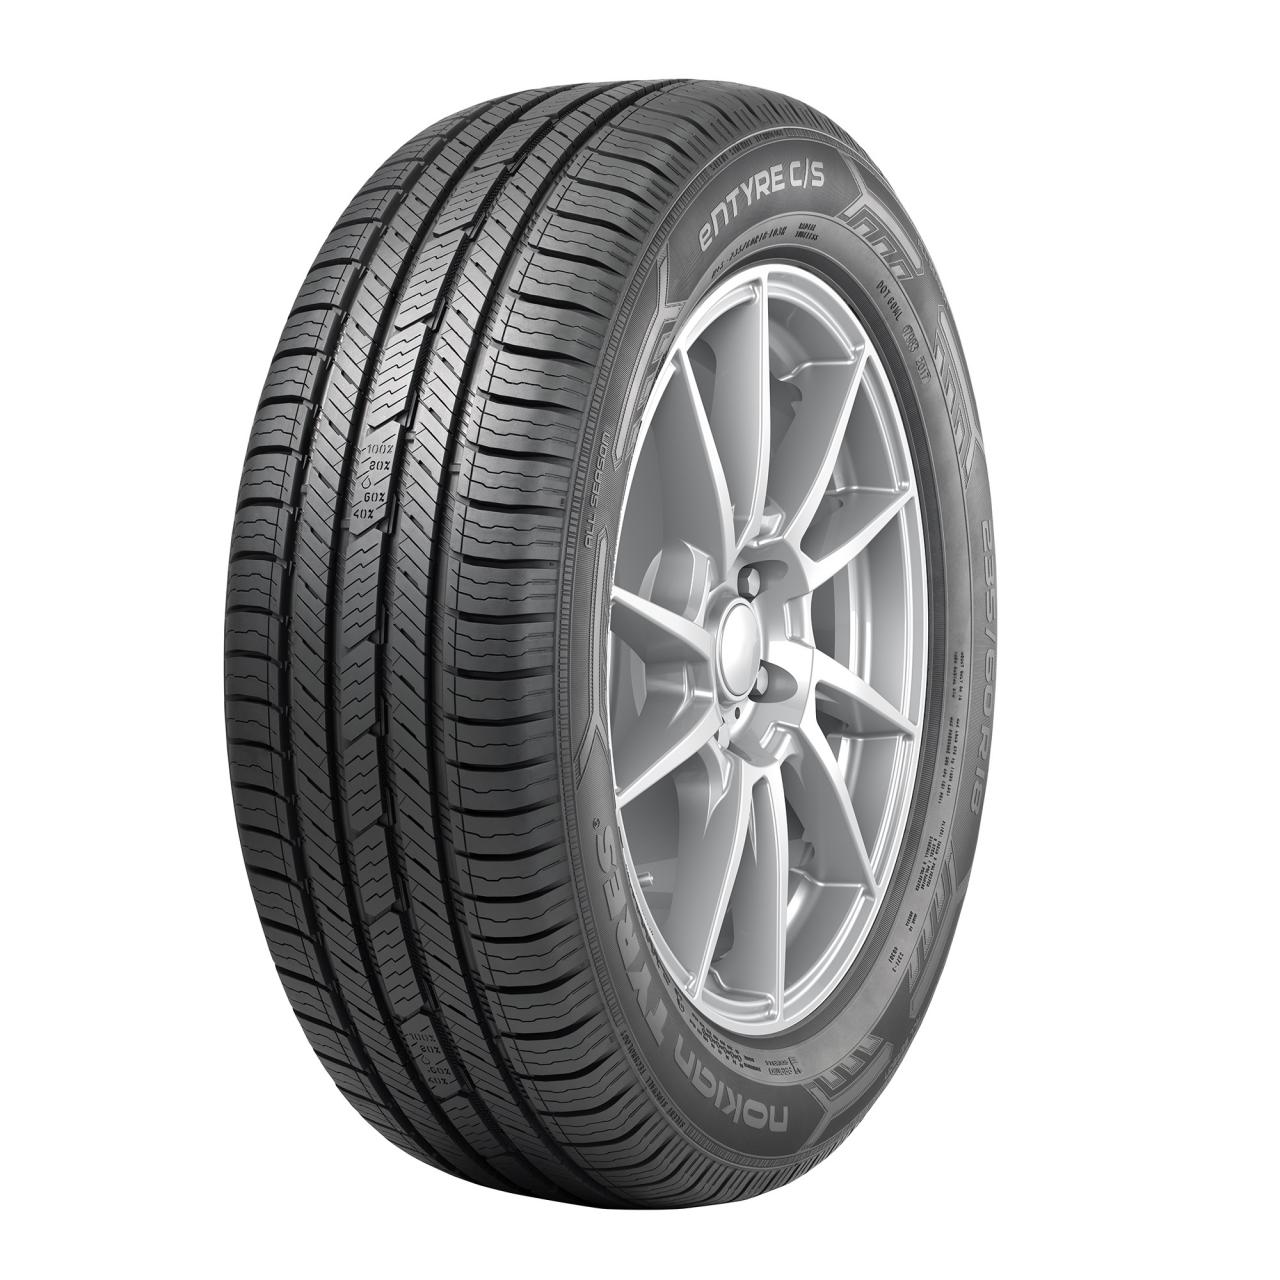 Nokian Entyre 2.0 Tire Review & Rating - Tire Reviews and More